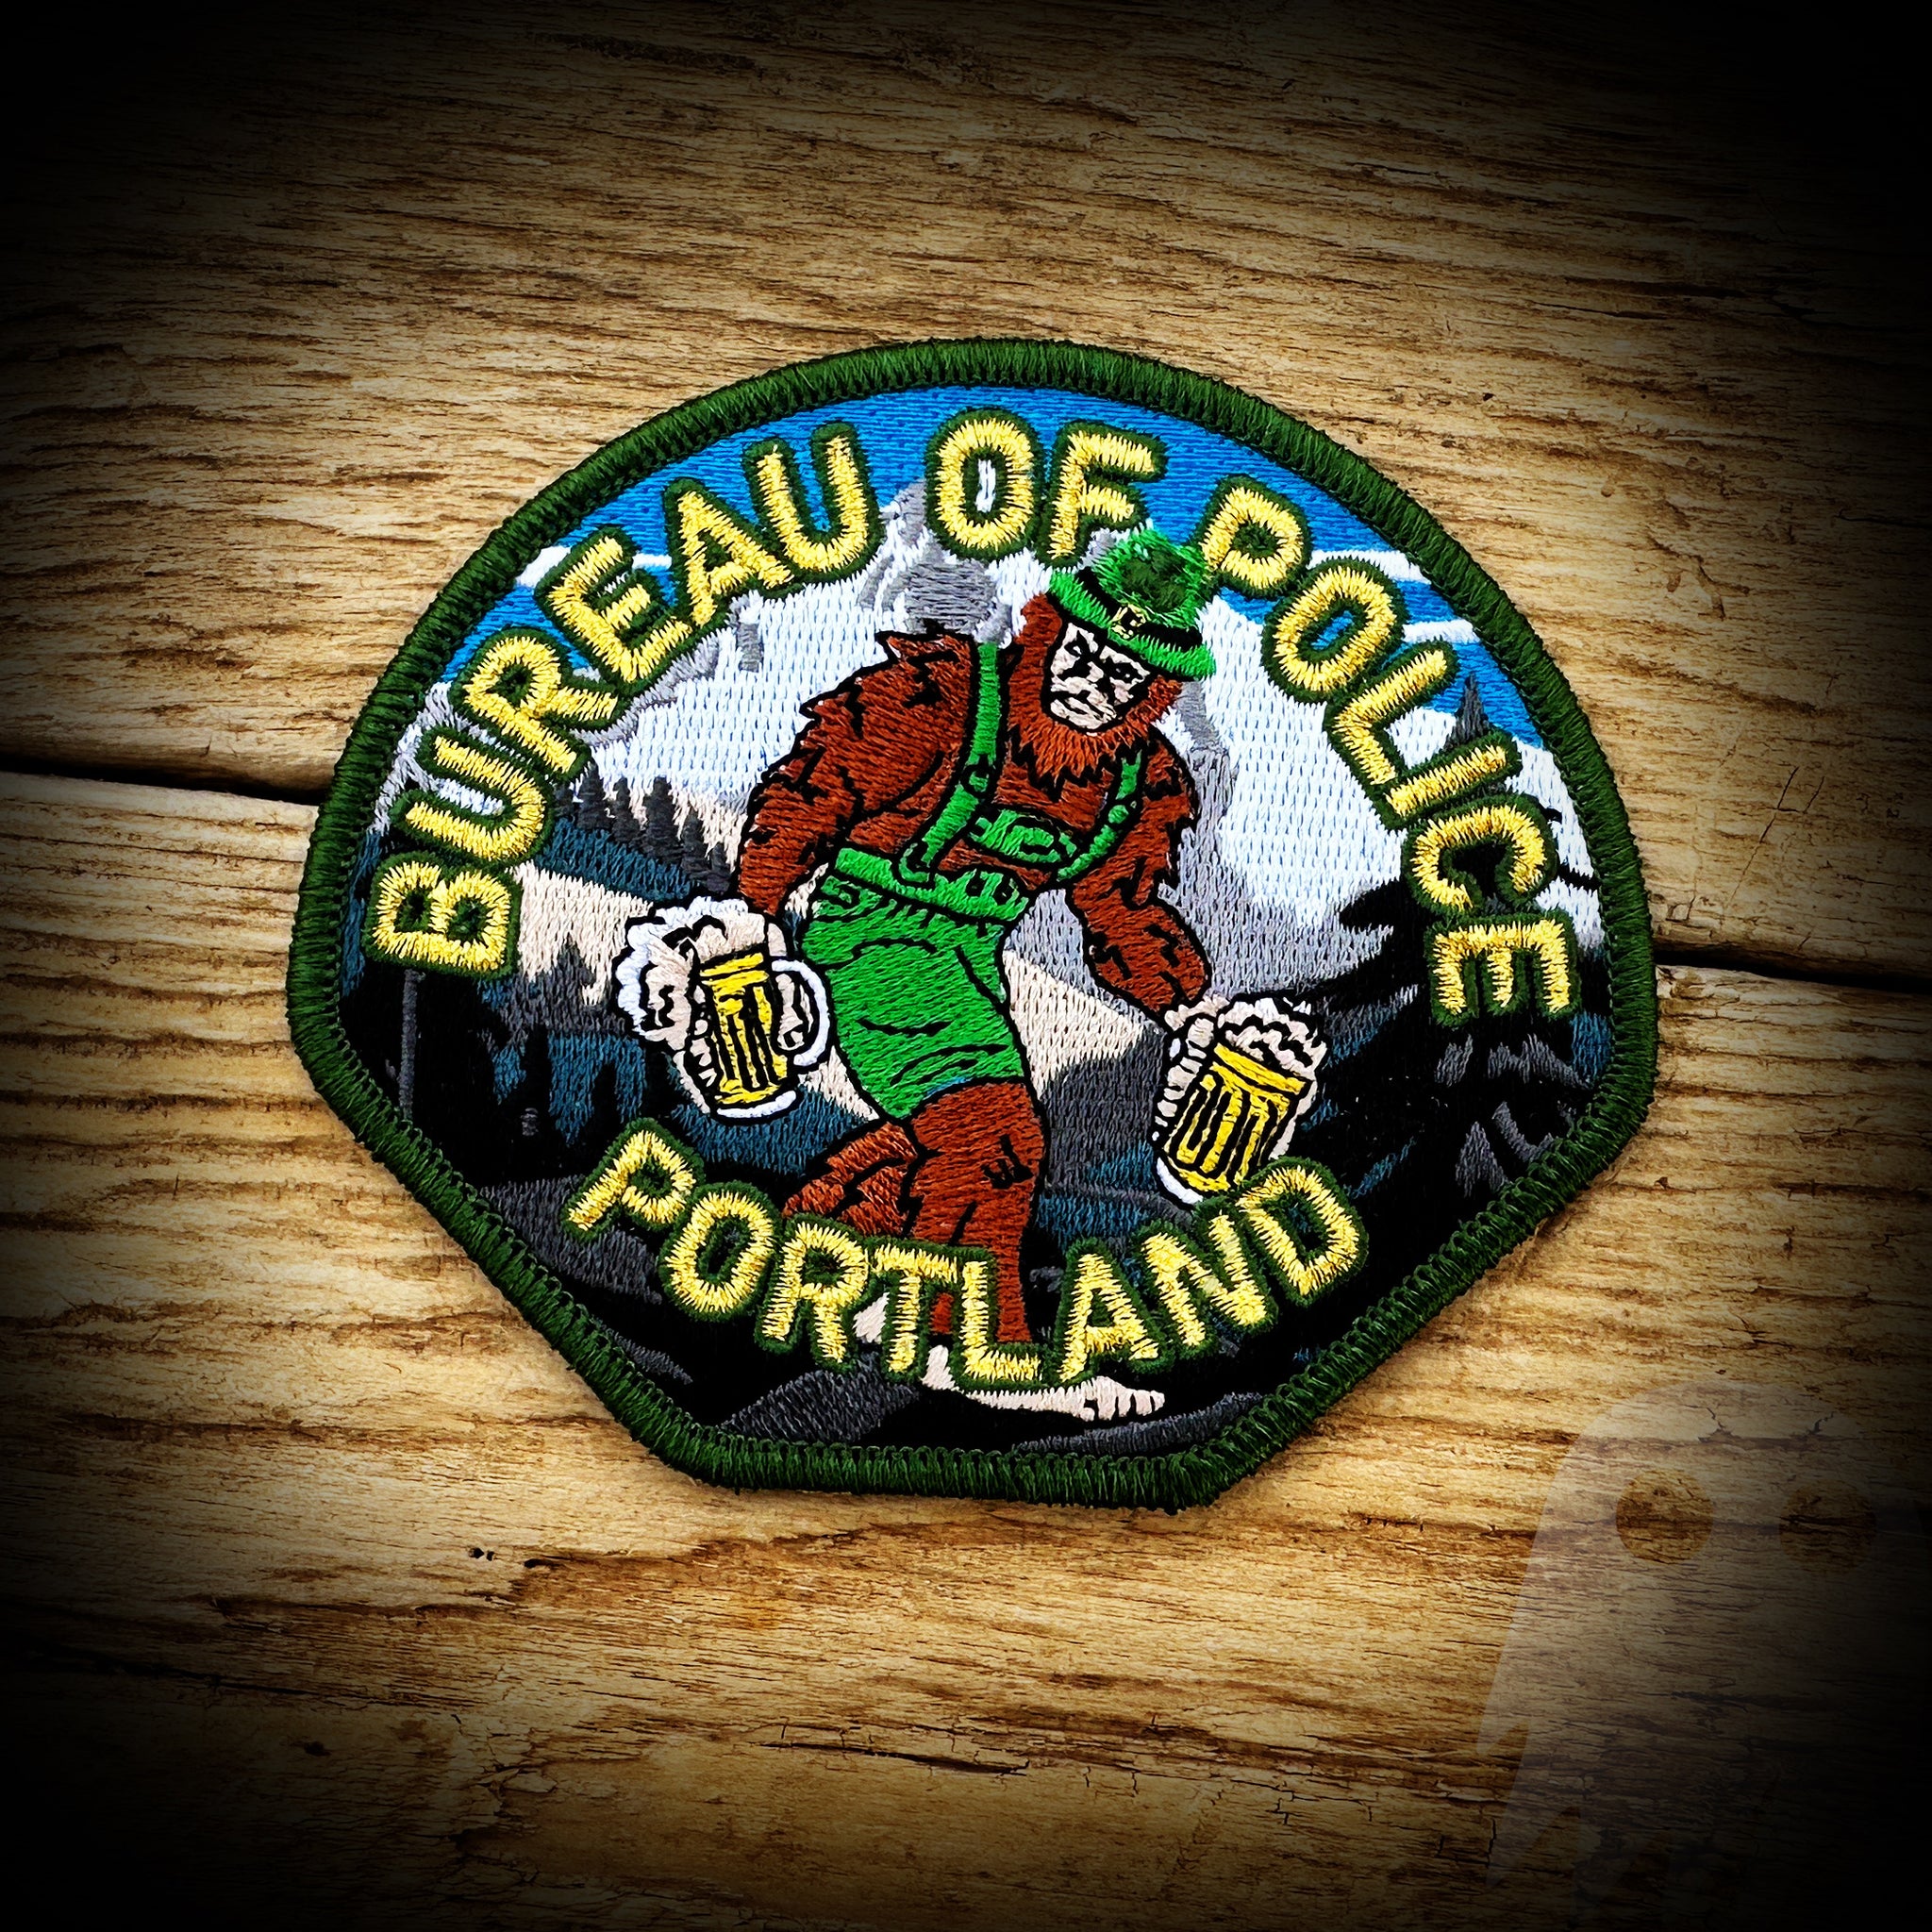 BIG FOOT Portland, OR Police Department 2023 St. Patrick's Day Patch - LIMITED AUTHENTIC BIG FOOT